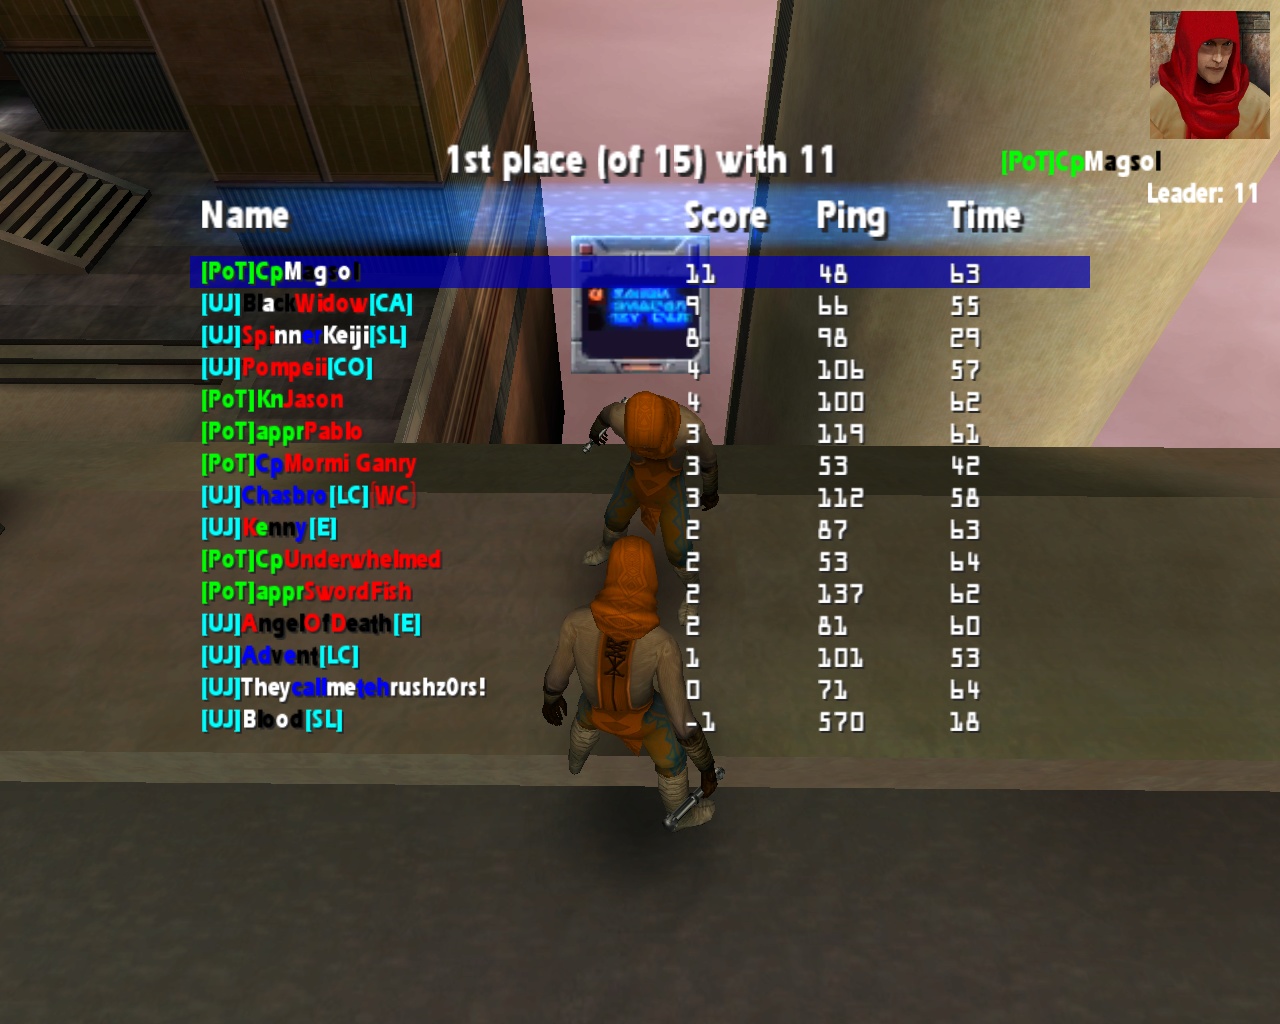 Screenshot of in-game scoreboard during the match with UJ, showing us kinda getting slaughtered.